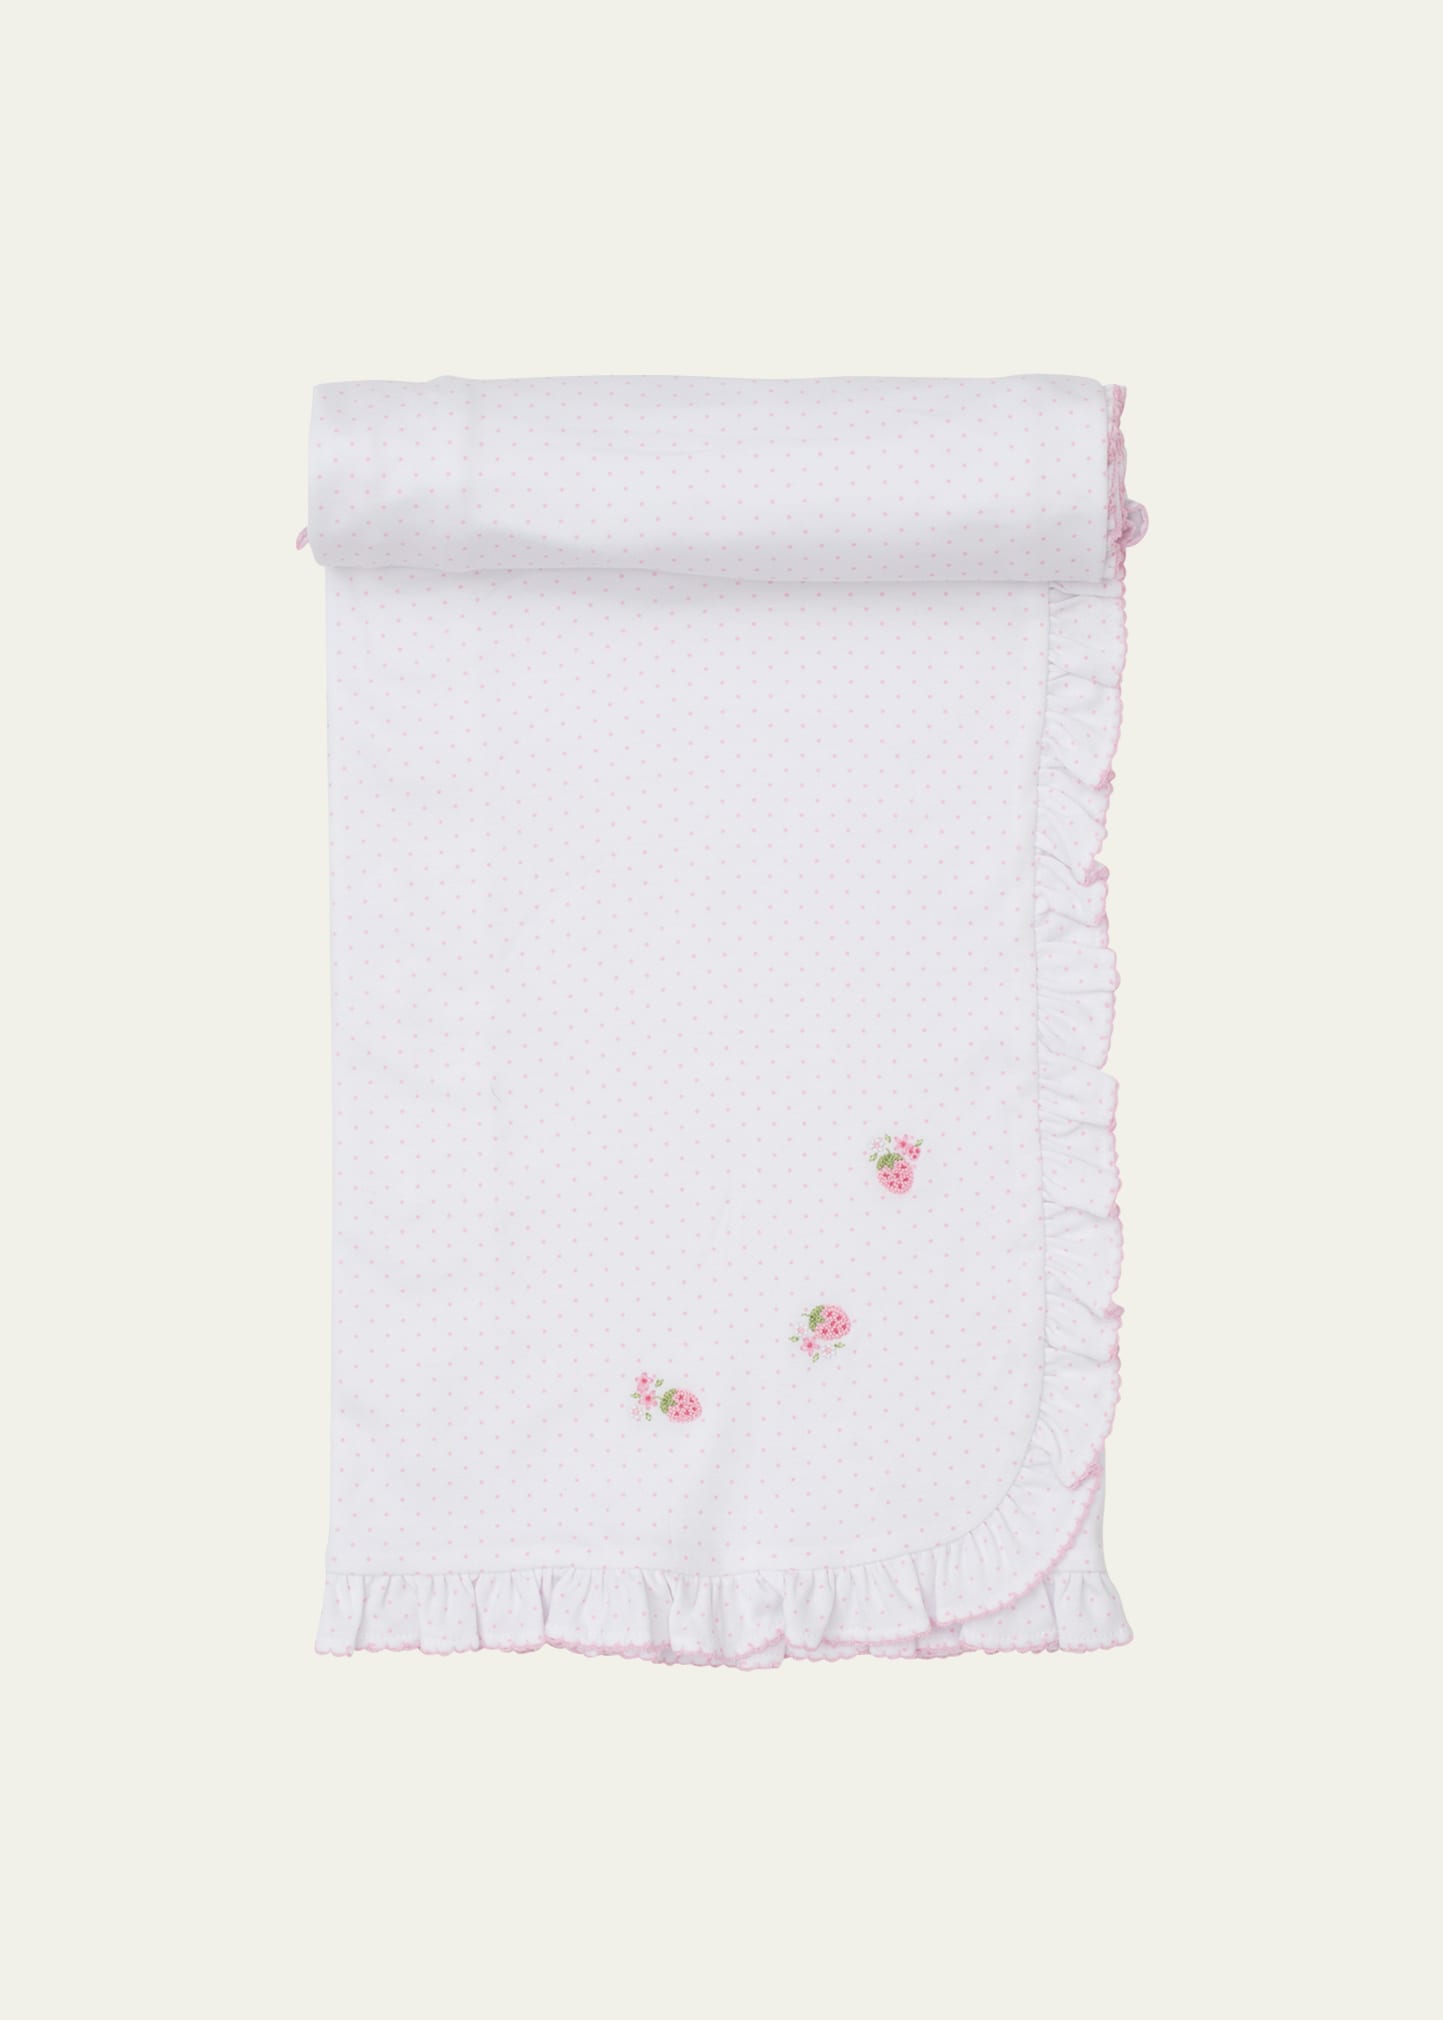 Kissy Kissy Kid's Strawberries on Top Embroidered Prima Cotton Blanket